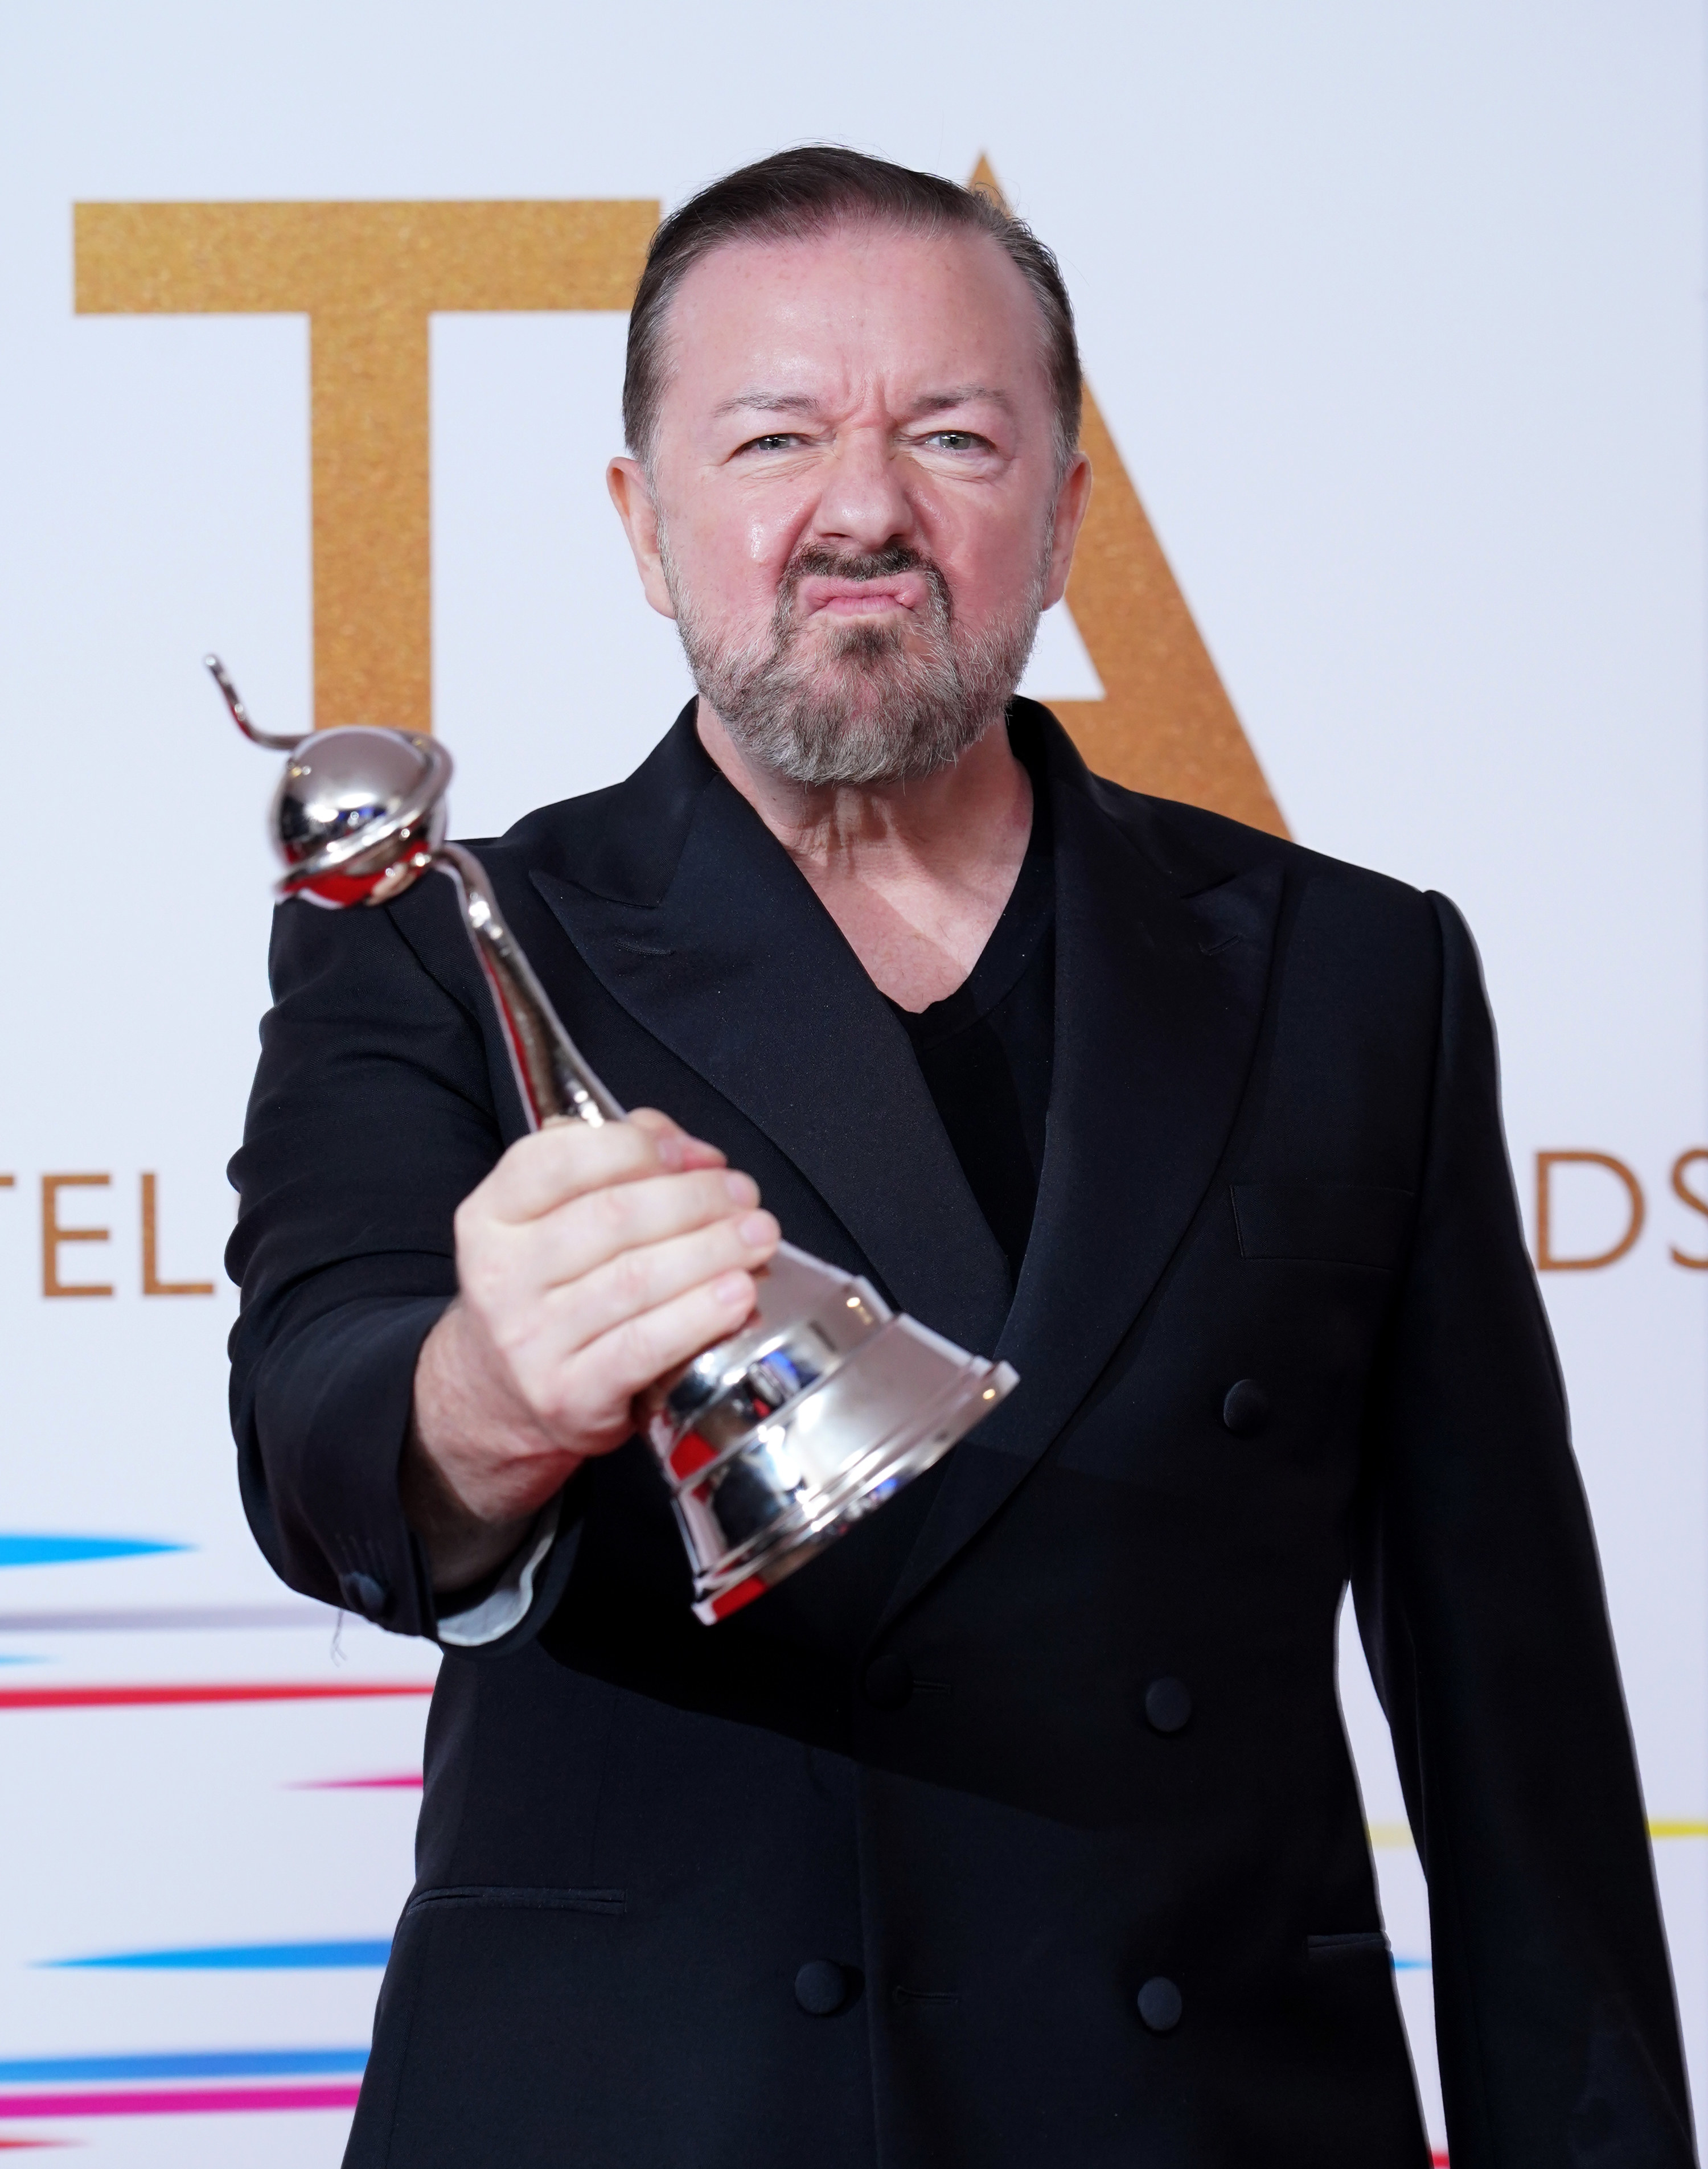 Ricky Gervais making a face at the camera while clutching a National Television Award in his hand